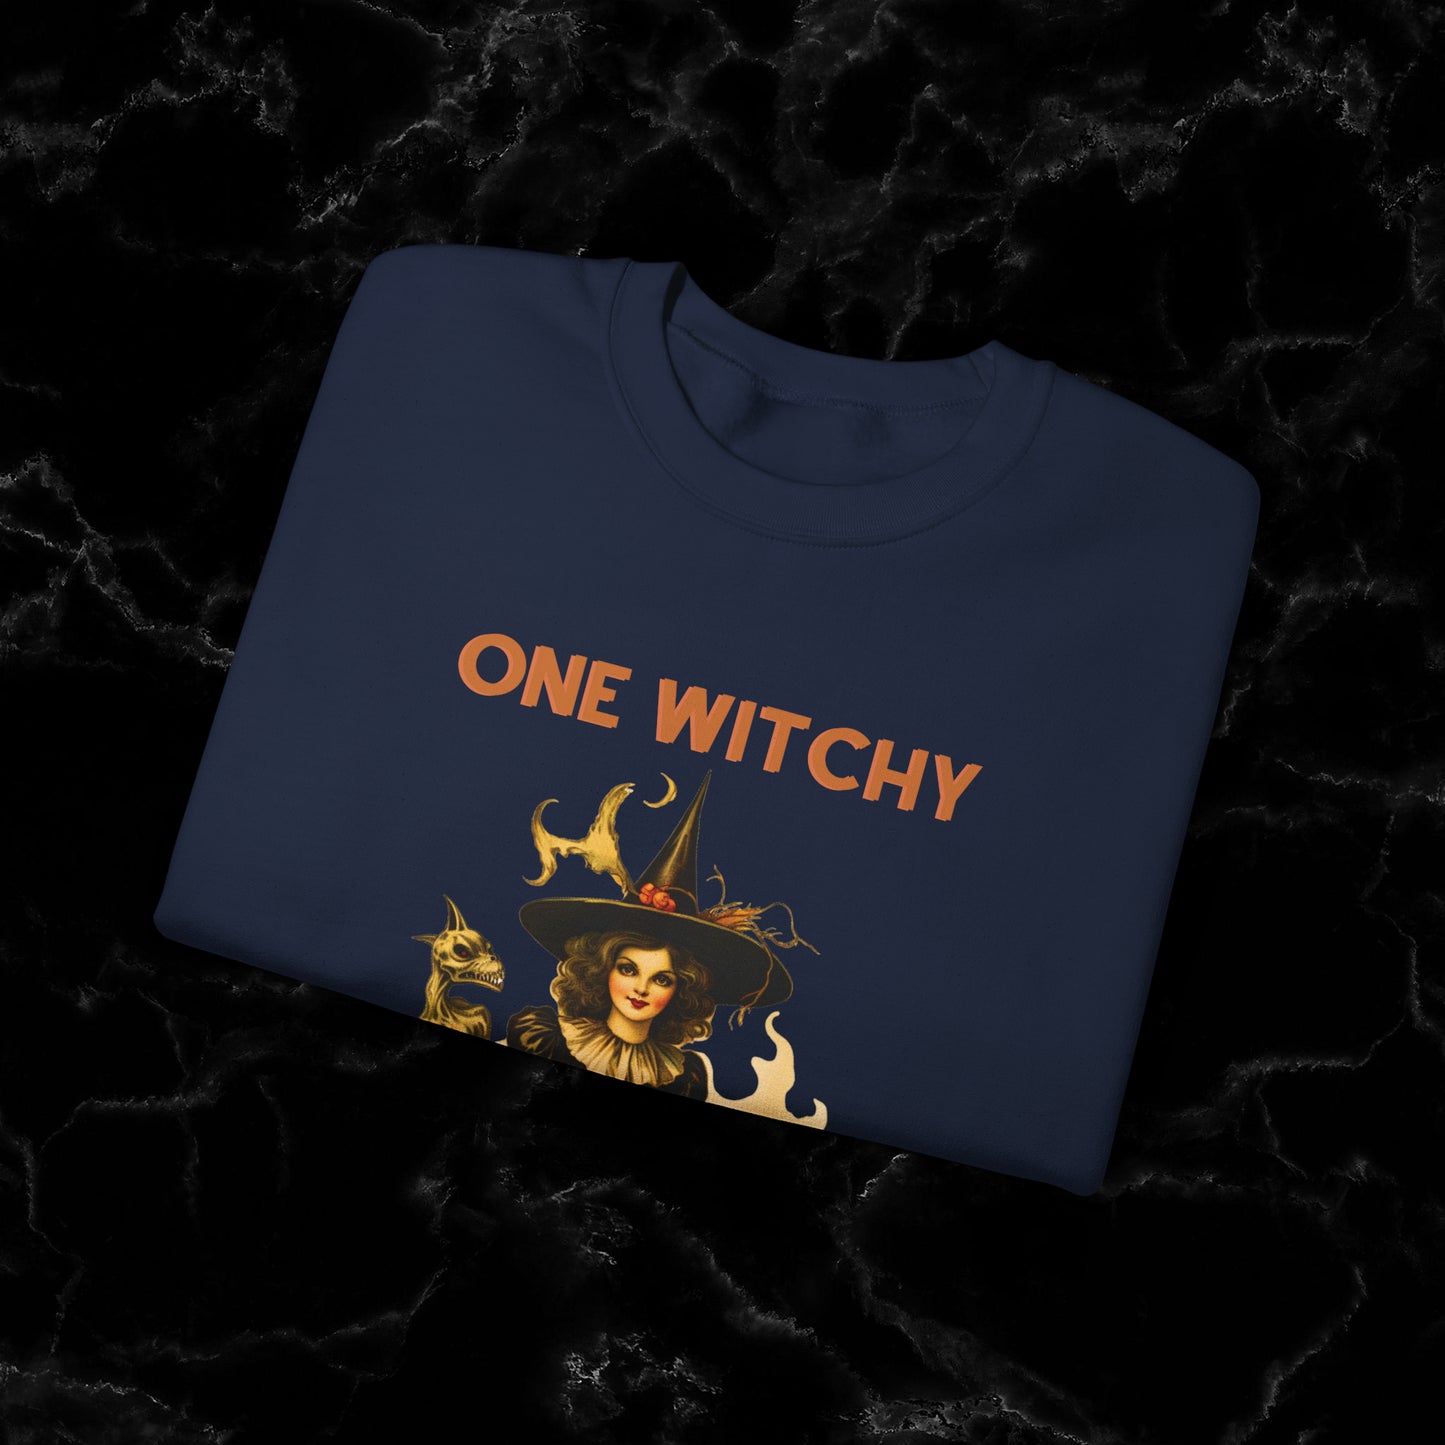 One Witchy Aunt Sweatshirt - Cool Aunt Shirt, Feral Aunt Sweatshirt, Perfect Gifts for Aunts, Auntie Sweatshirt Sweatshirt   